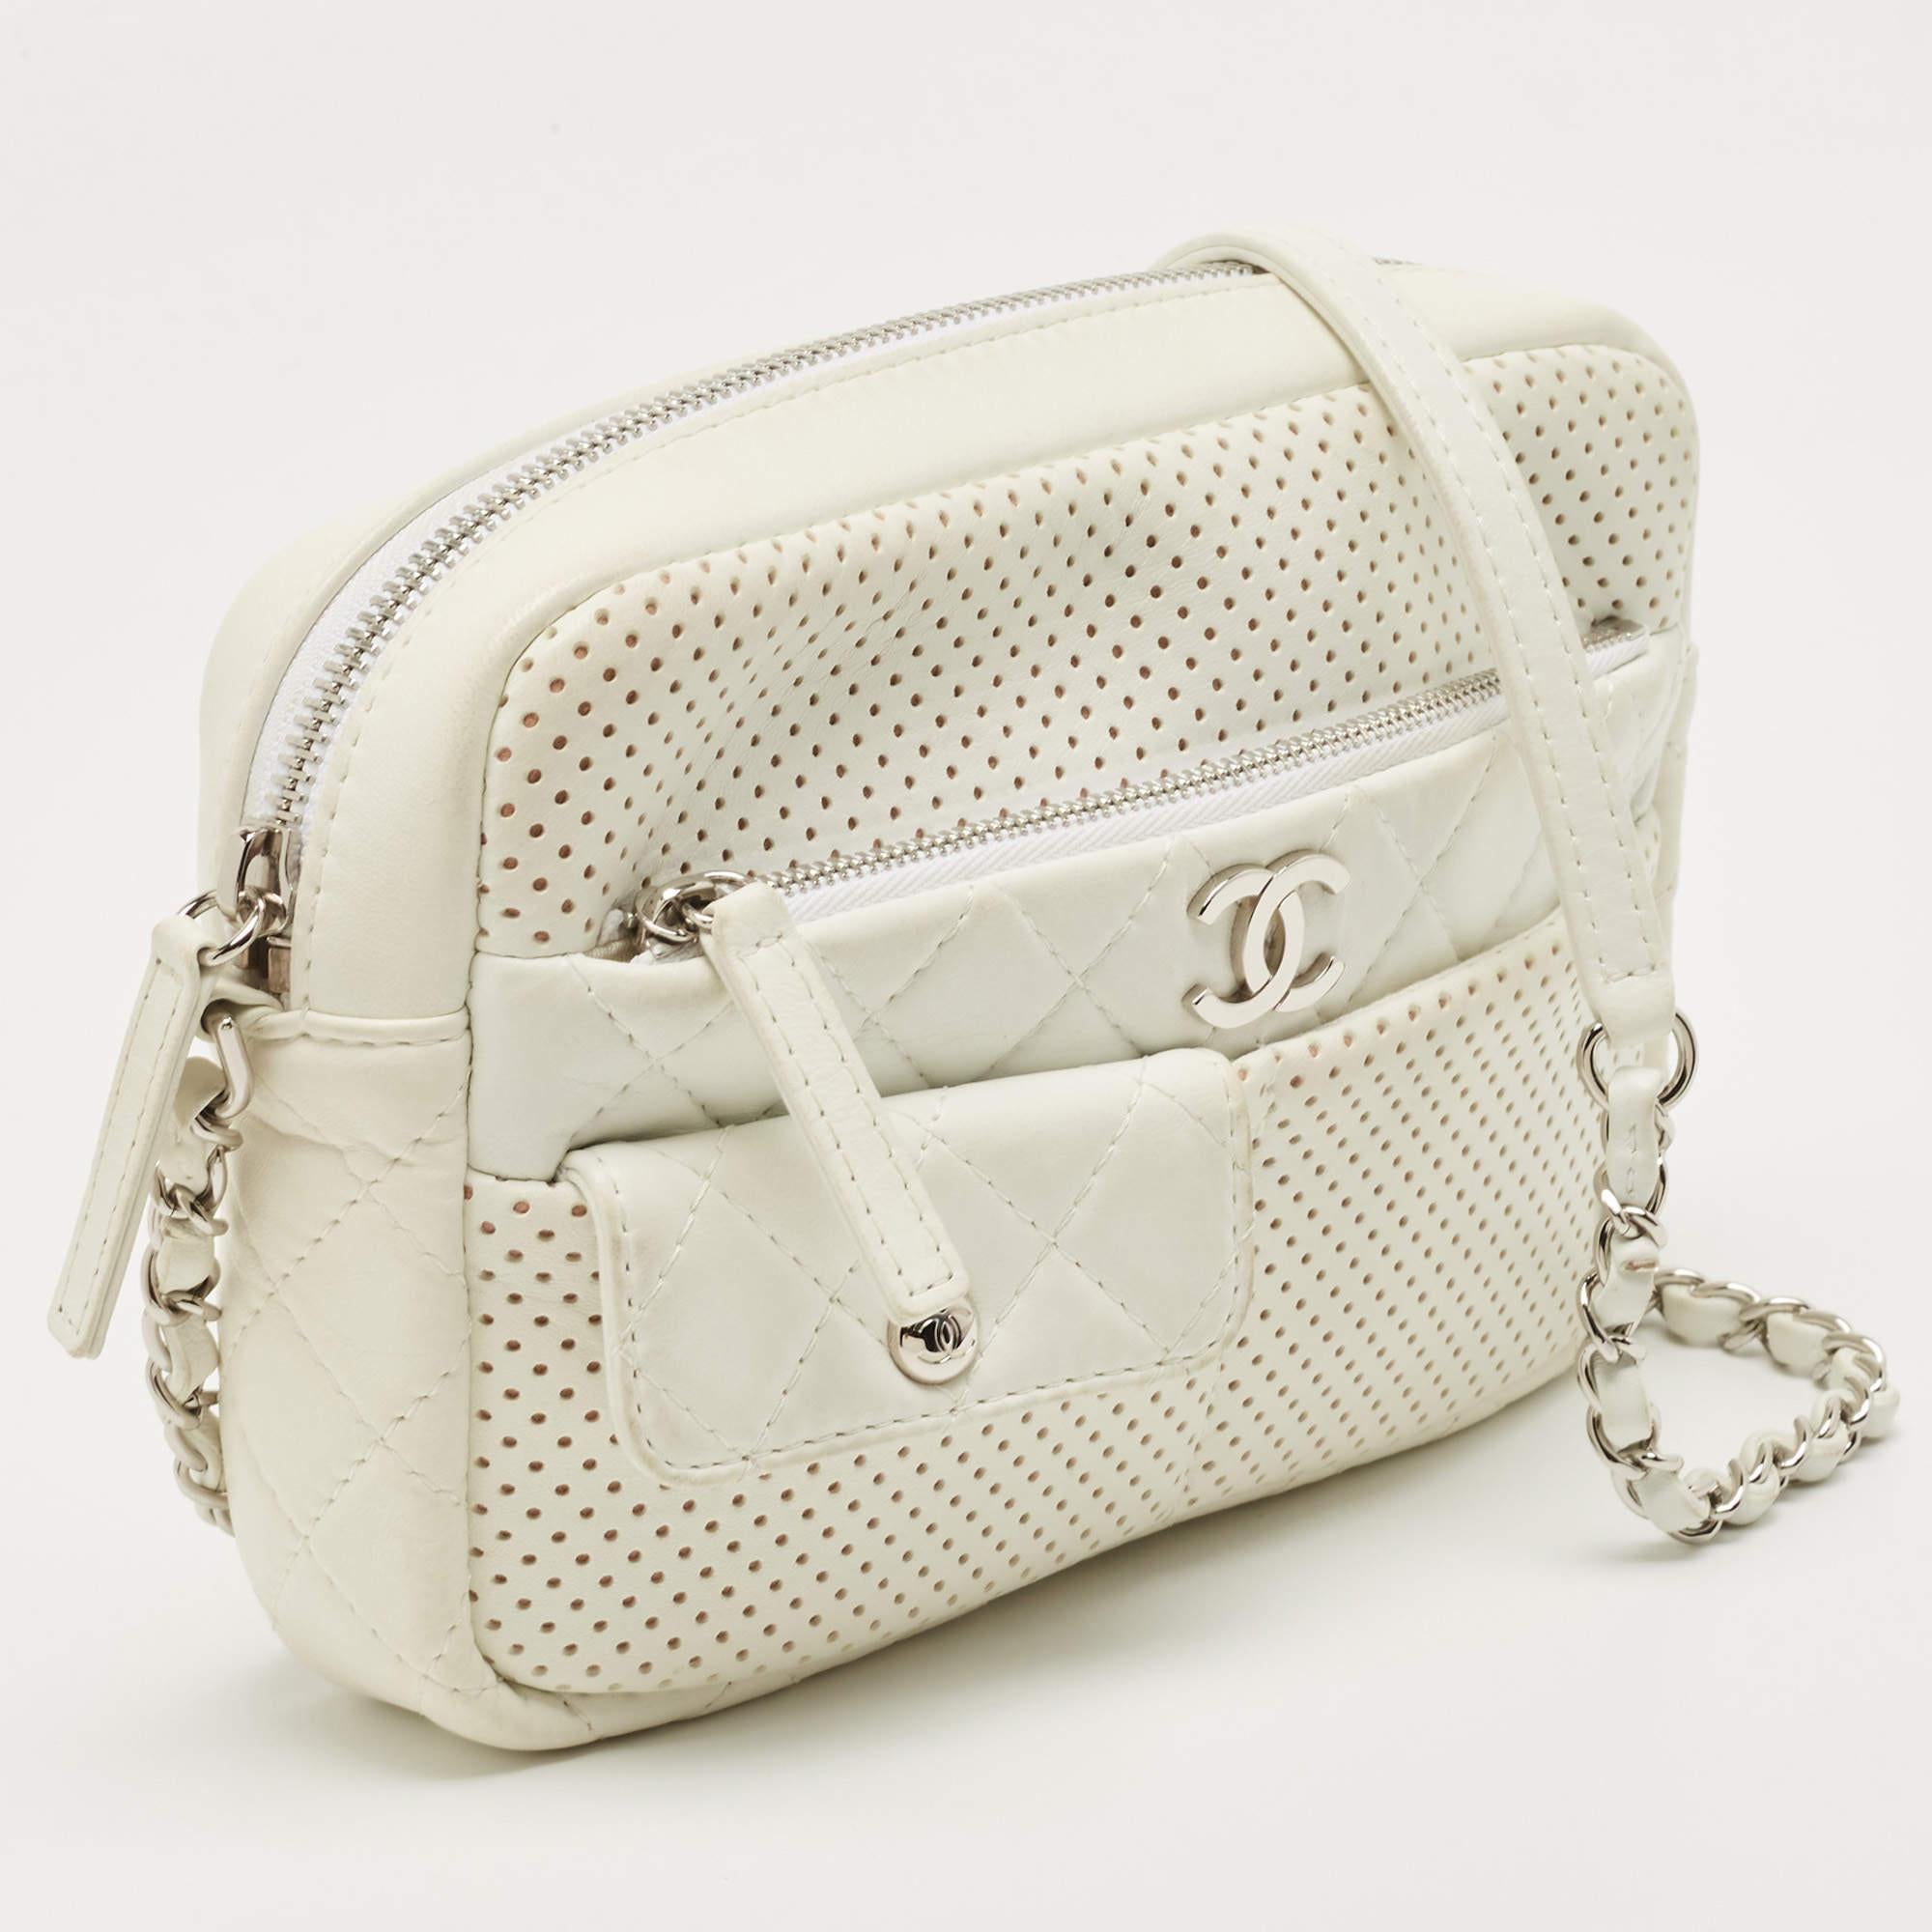 Indulge in luxury with this Chanel Ultra Pocket Camera bag. Meticulously crafted from premium materials, it combines exquisite design, impeccable craftsmanship, and timeless elegance. Elevate your style with this fashion accessory.

